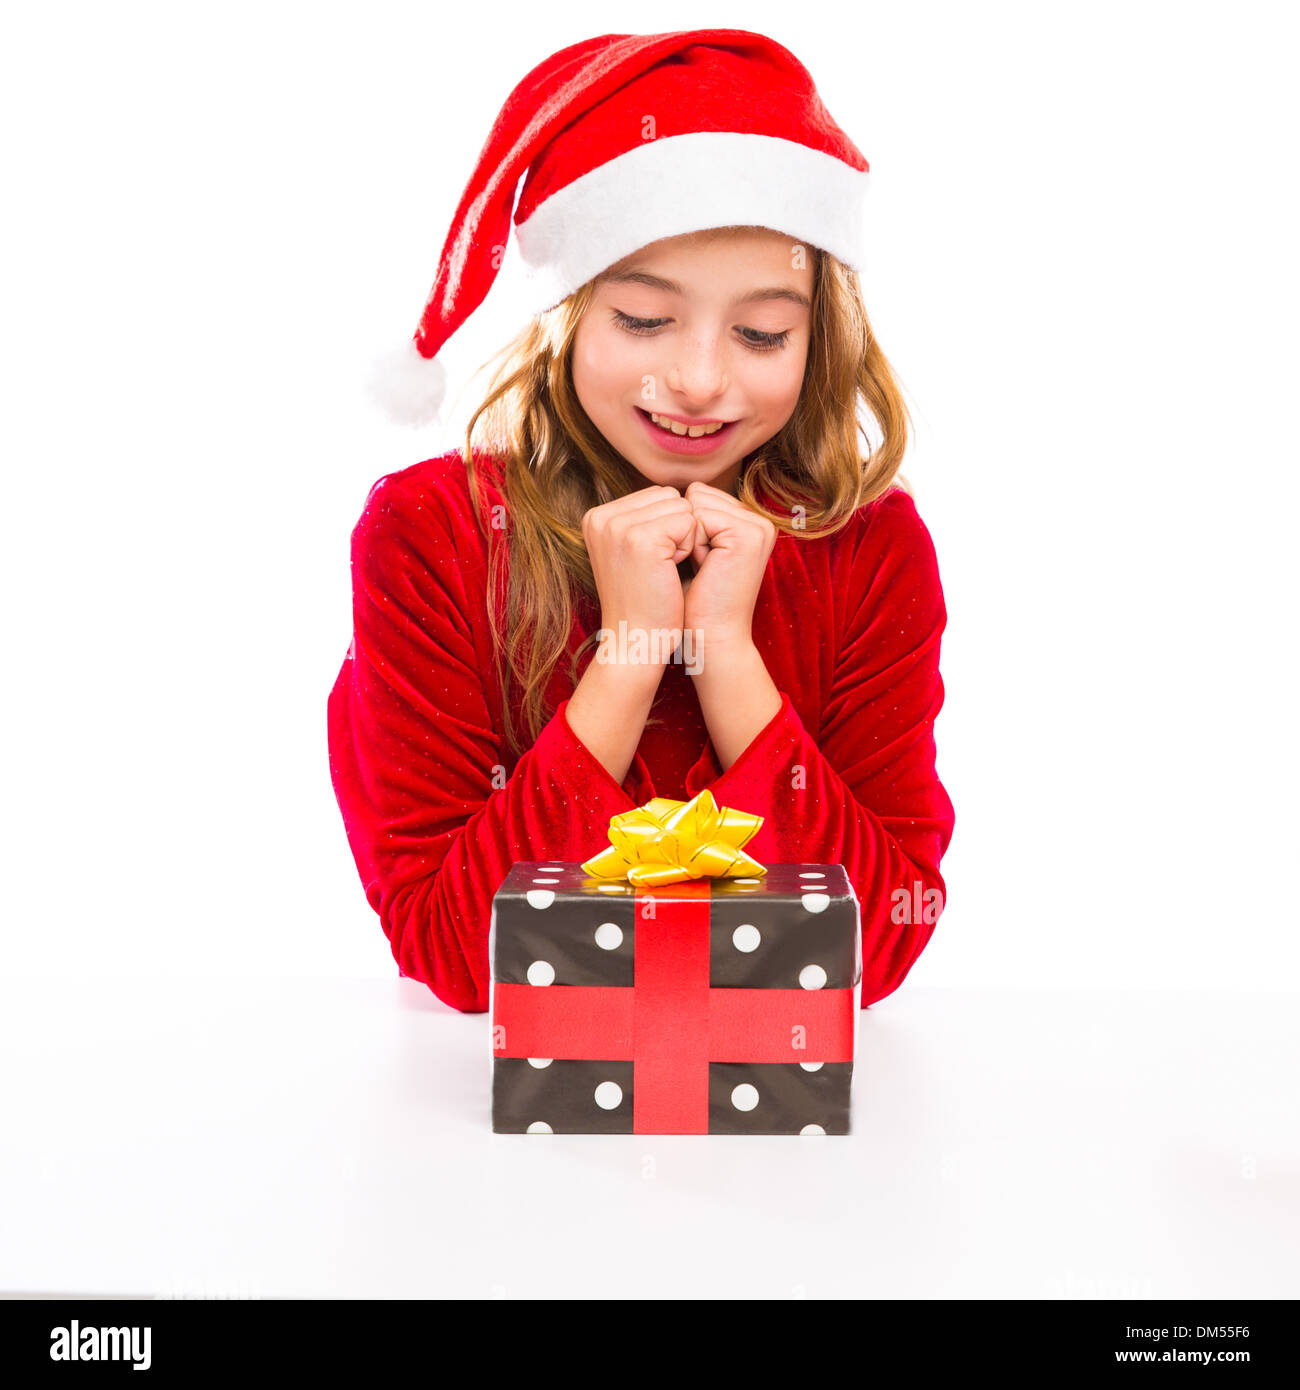 Christmas Santa kid girl happy excited with ribbon gift isolated on white background Stock Photo